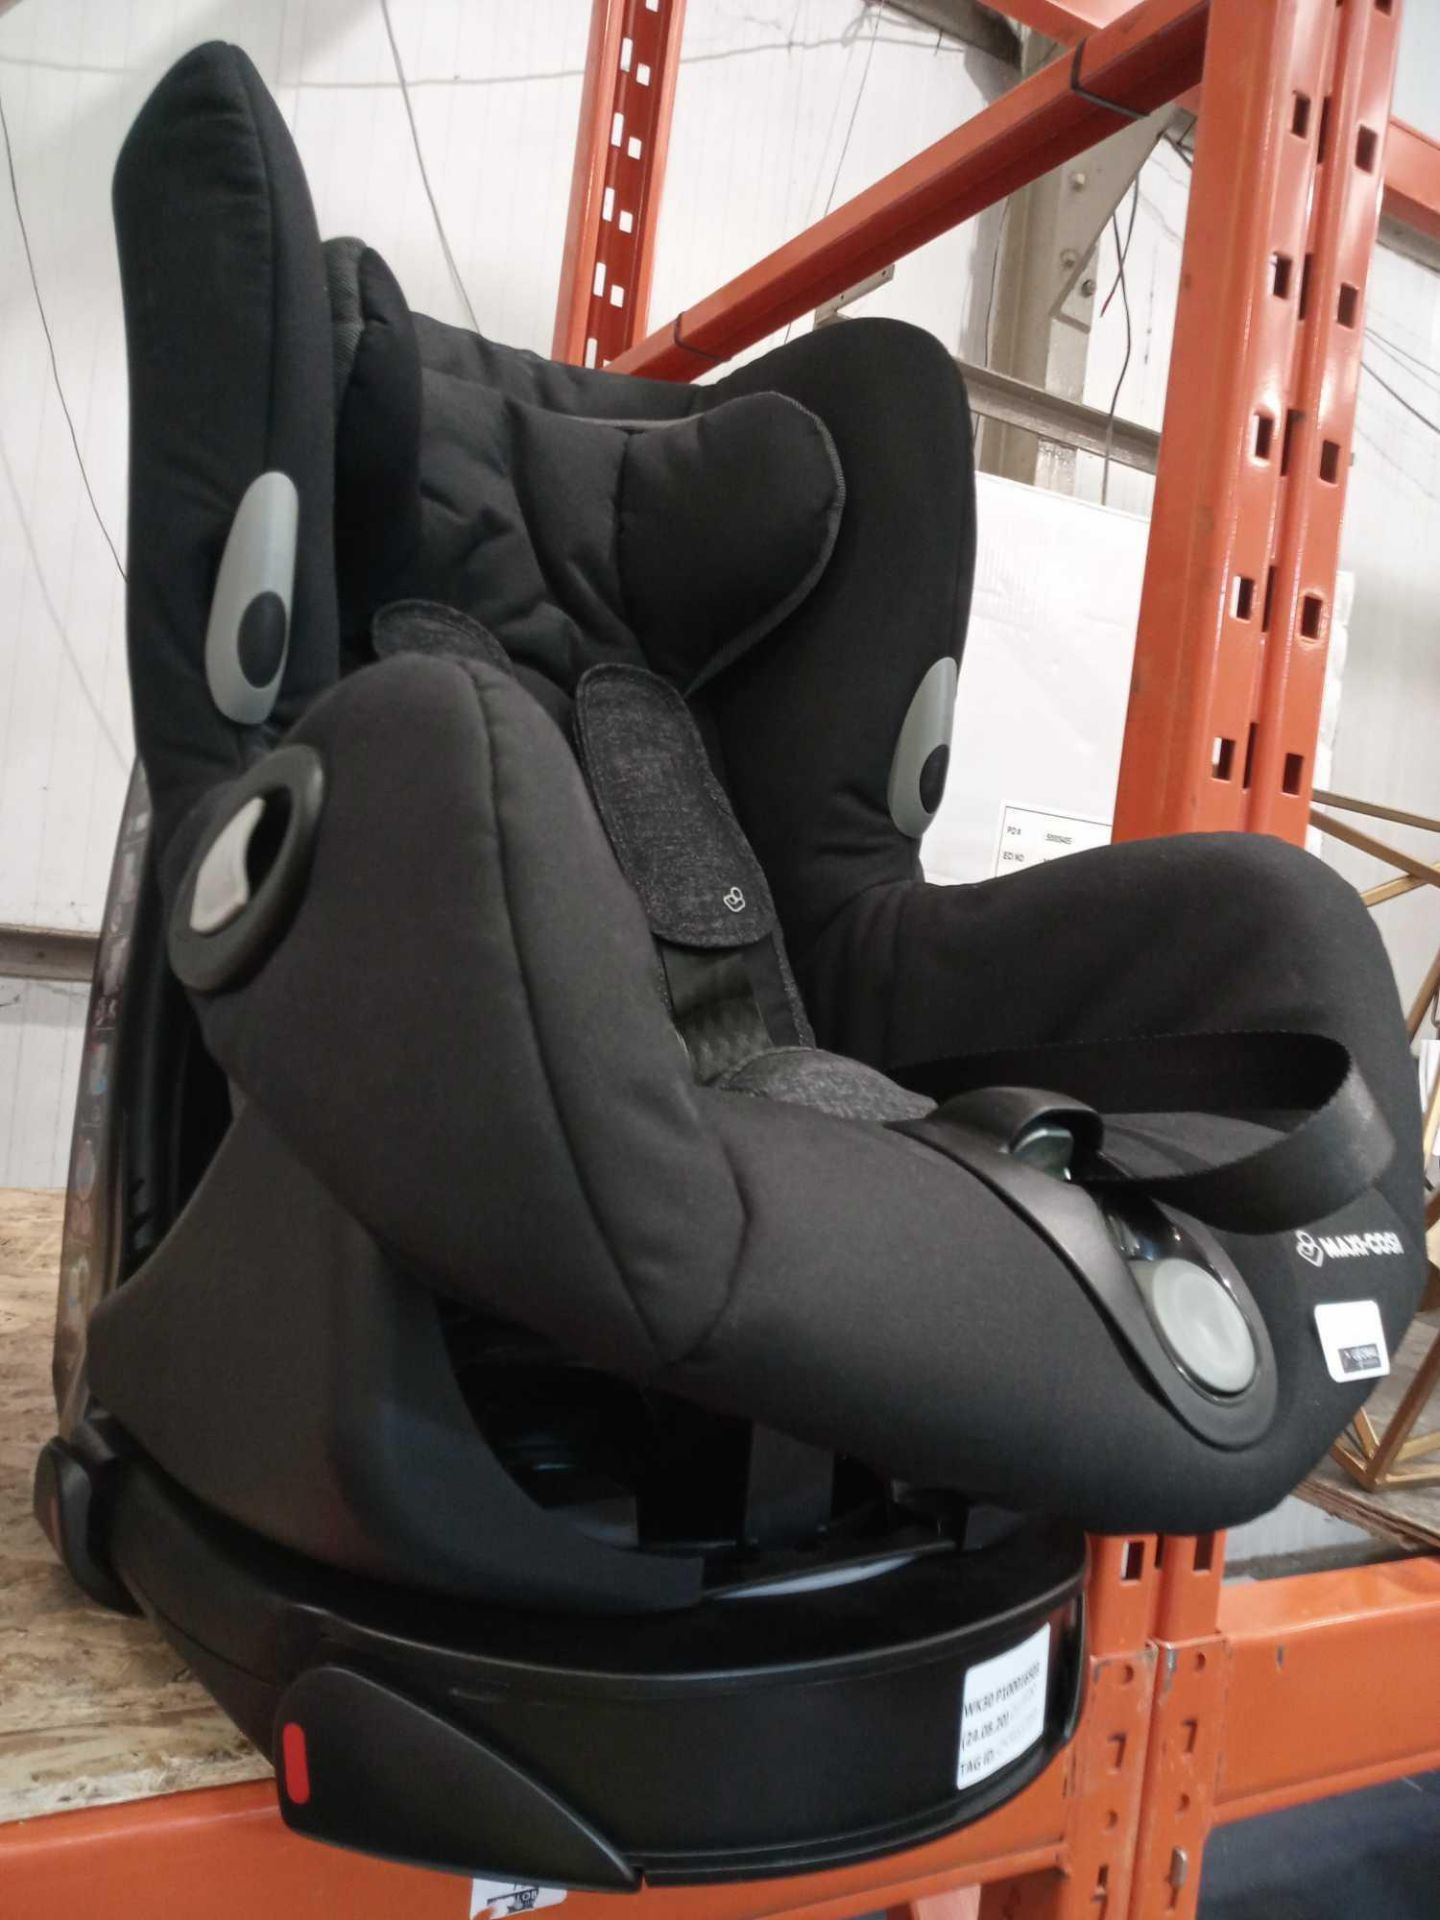 Rrp £150 Maxi-Cosi Axissfix In Car Kids At Safety Seats With Base